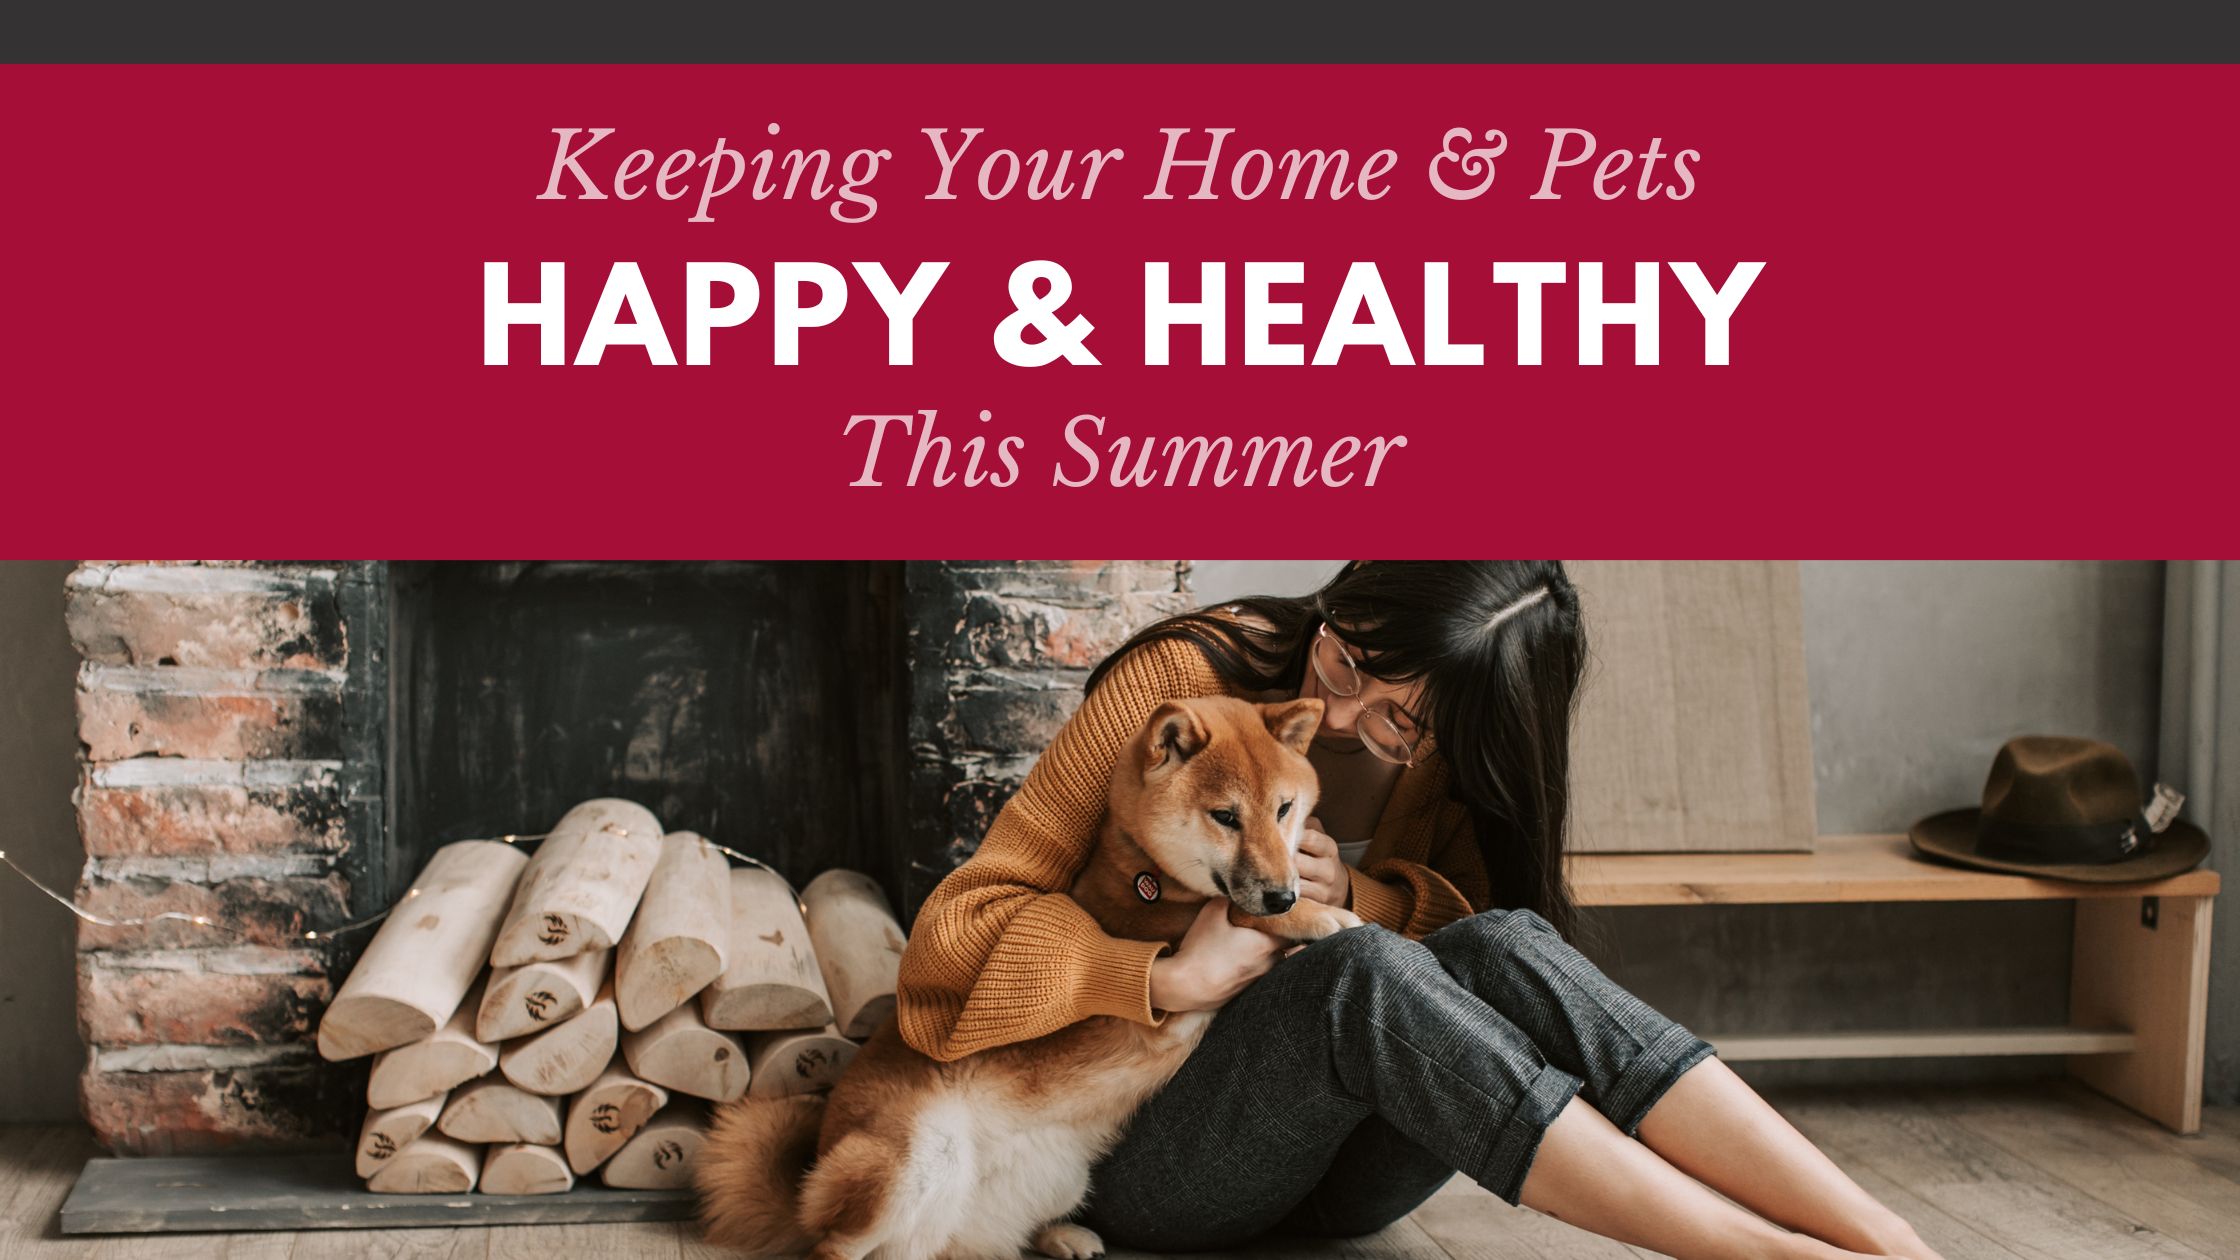 Keeping Your Home & Pets Healthy & Happy This Summer